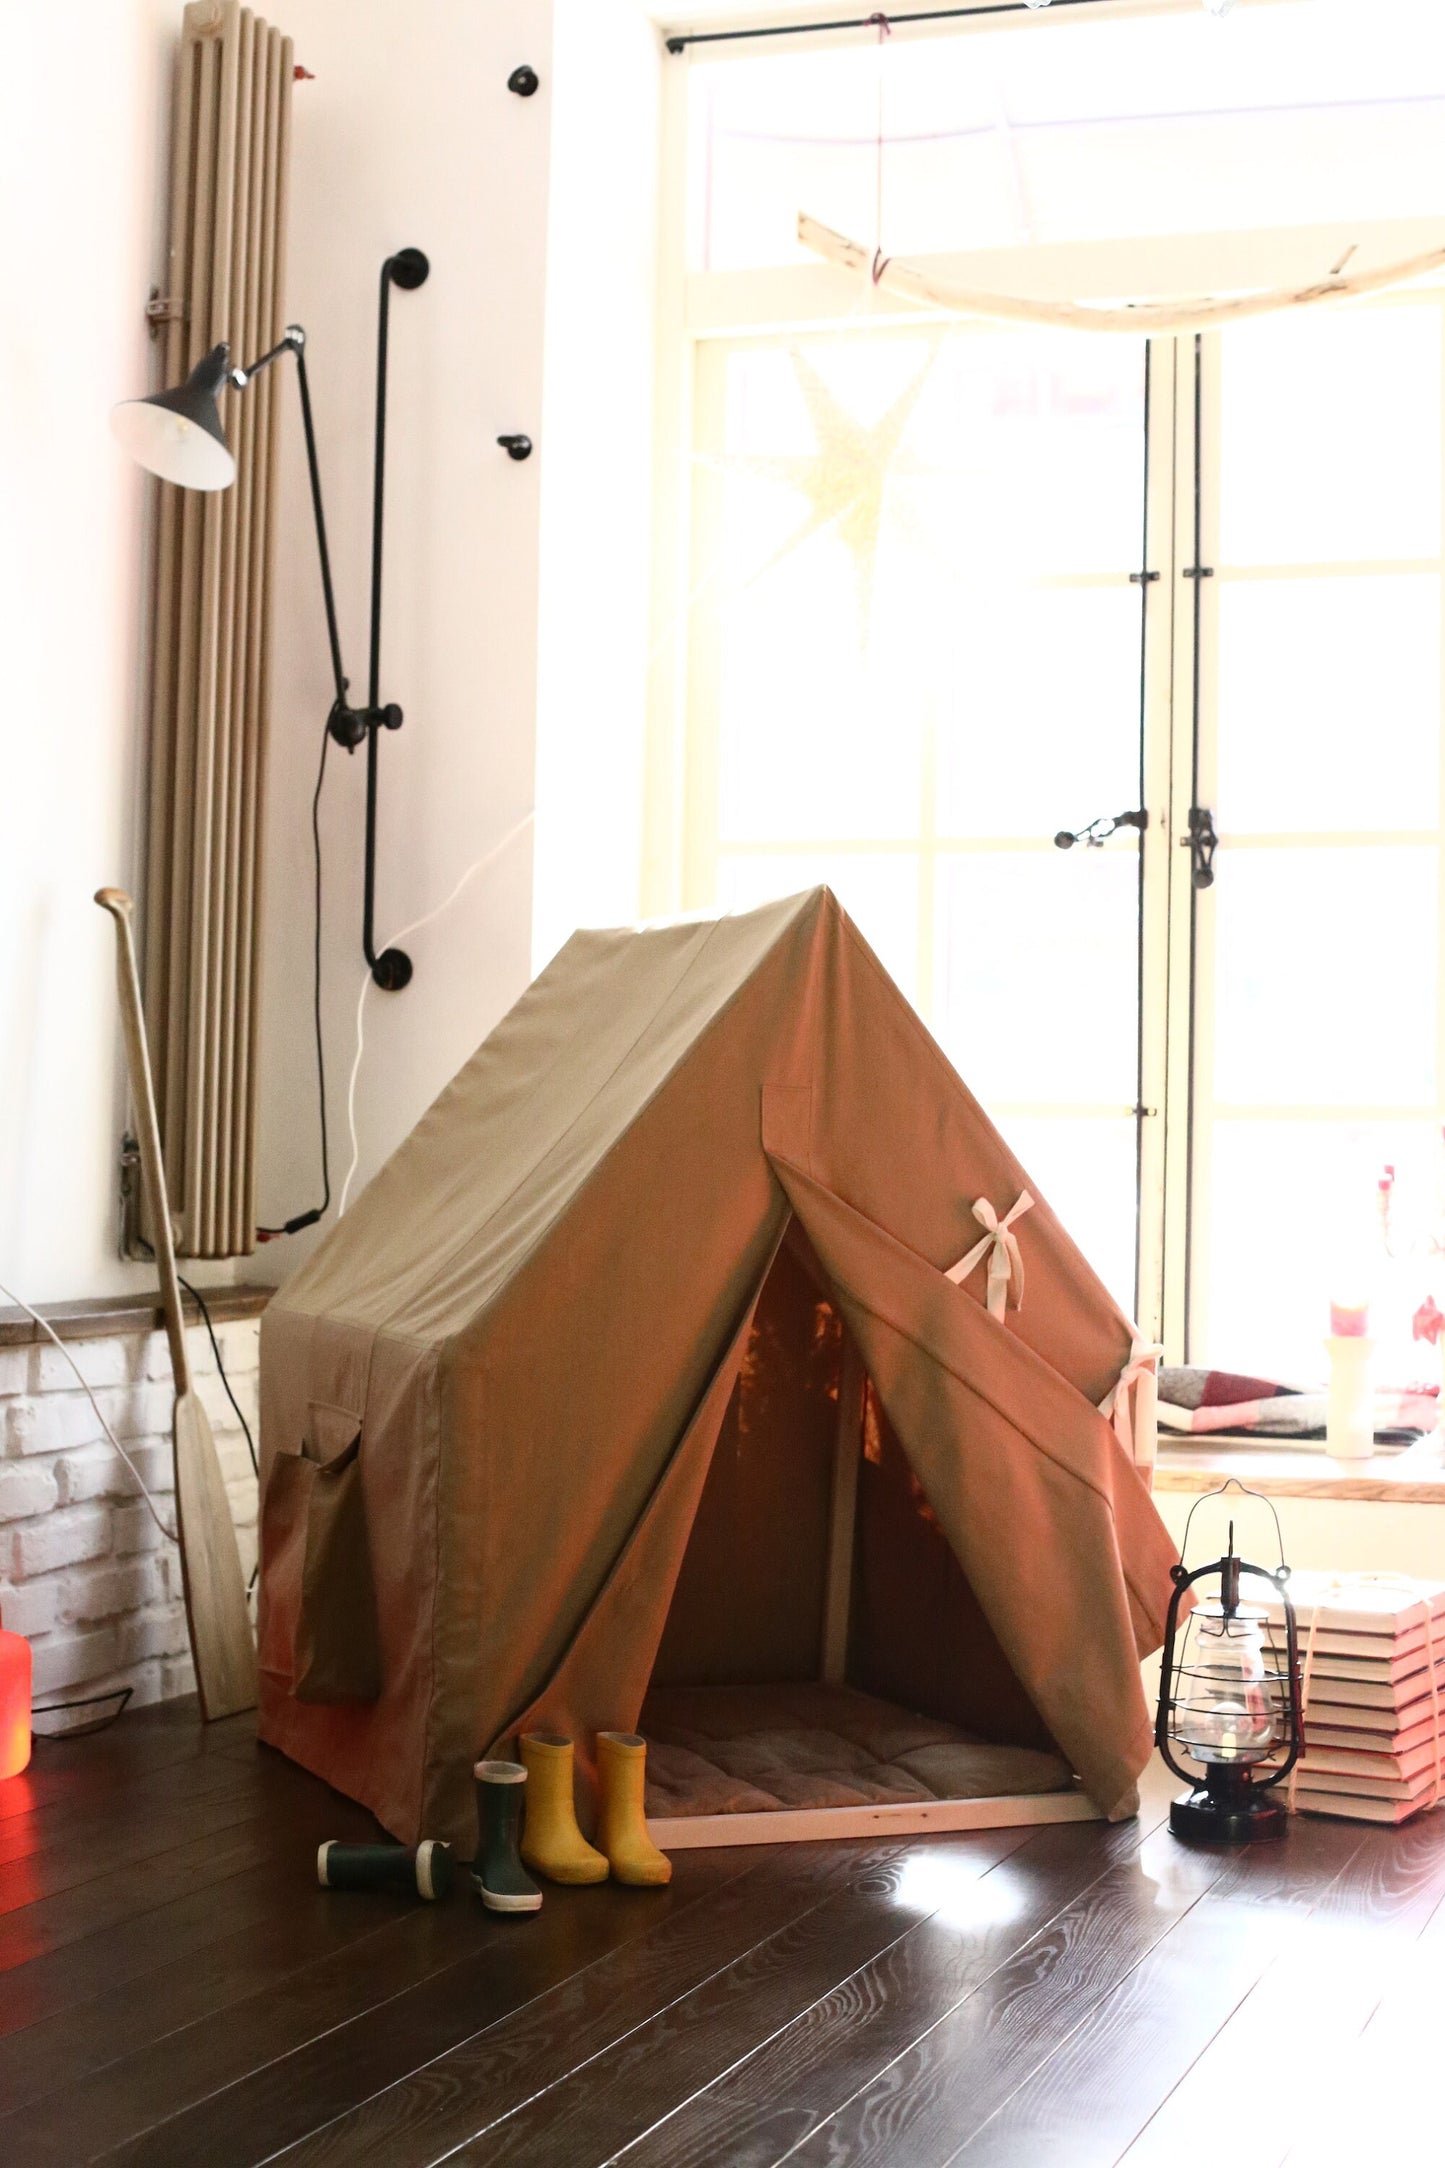 Custom Canopy Tent | Childrens Play Tent | Play Teepee | Boys Indoor Tent | Castle Play Tent | Boy Canopy Tent - Christmas gift